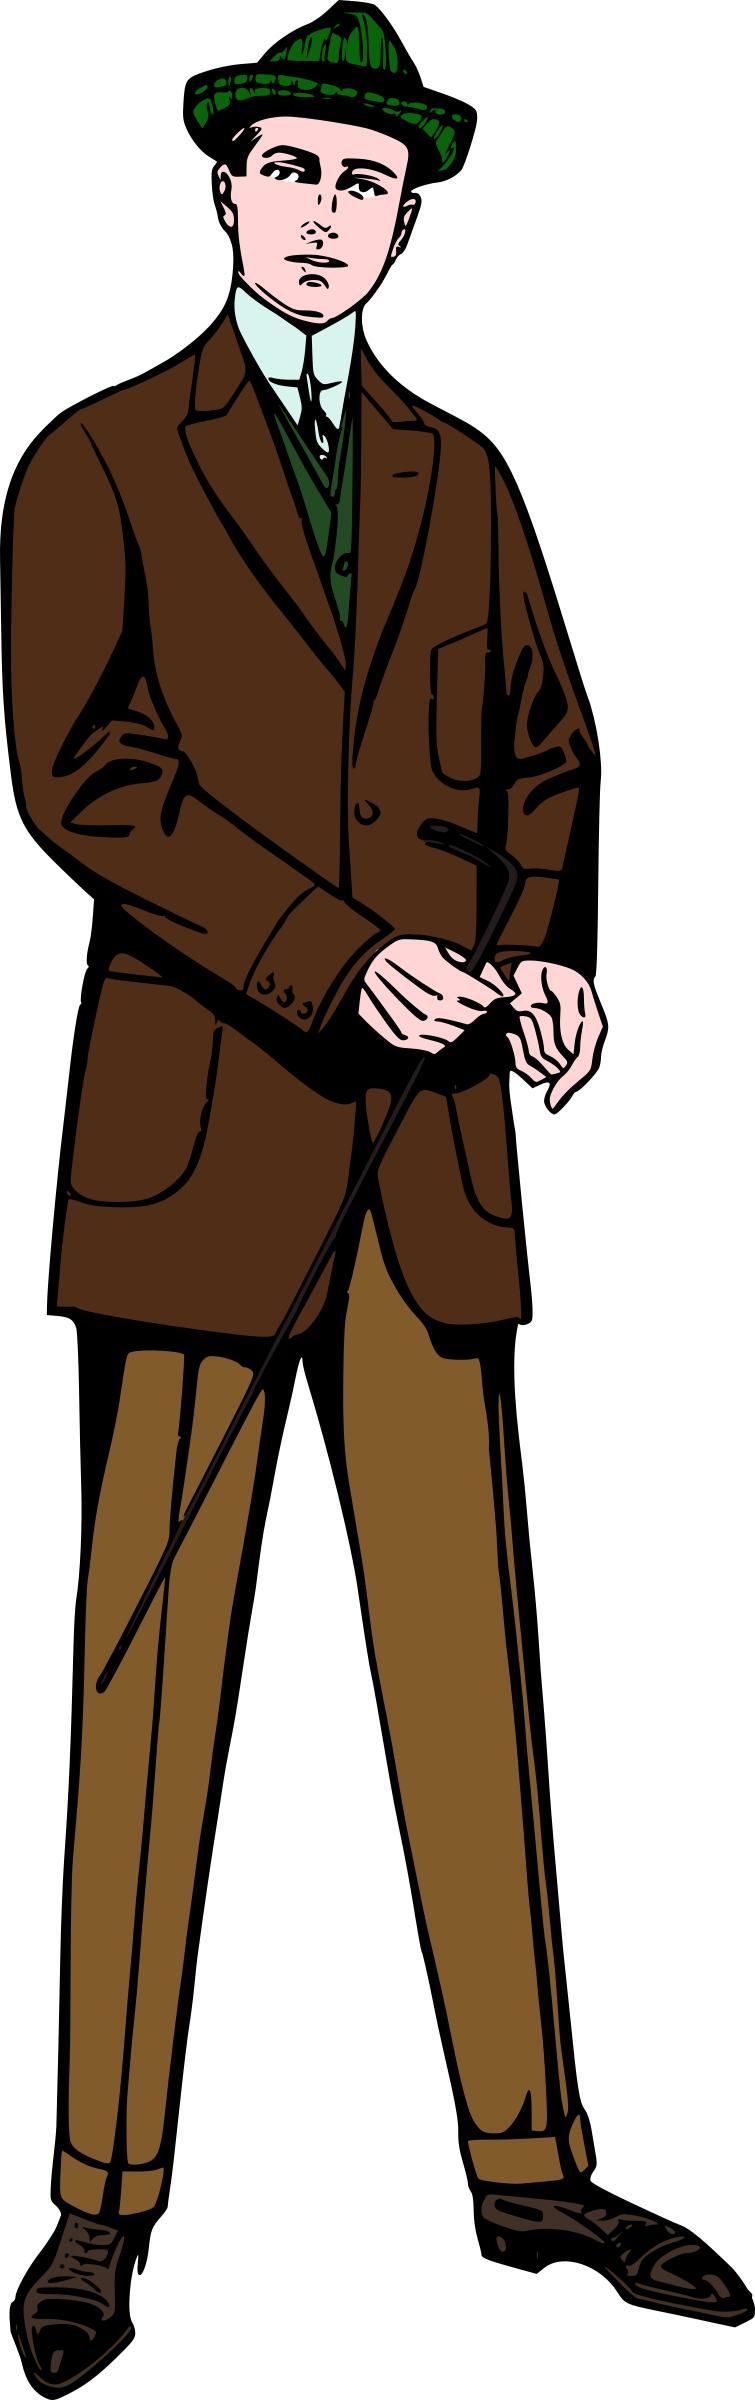 Man in brown/green suit png transparent